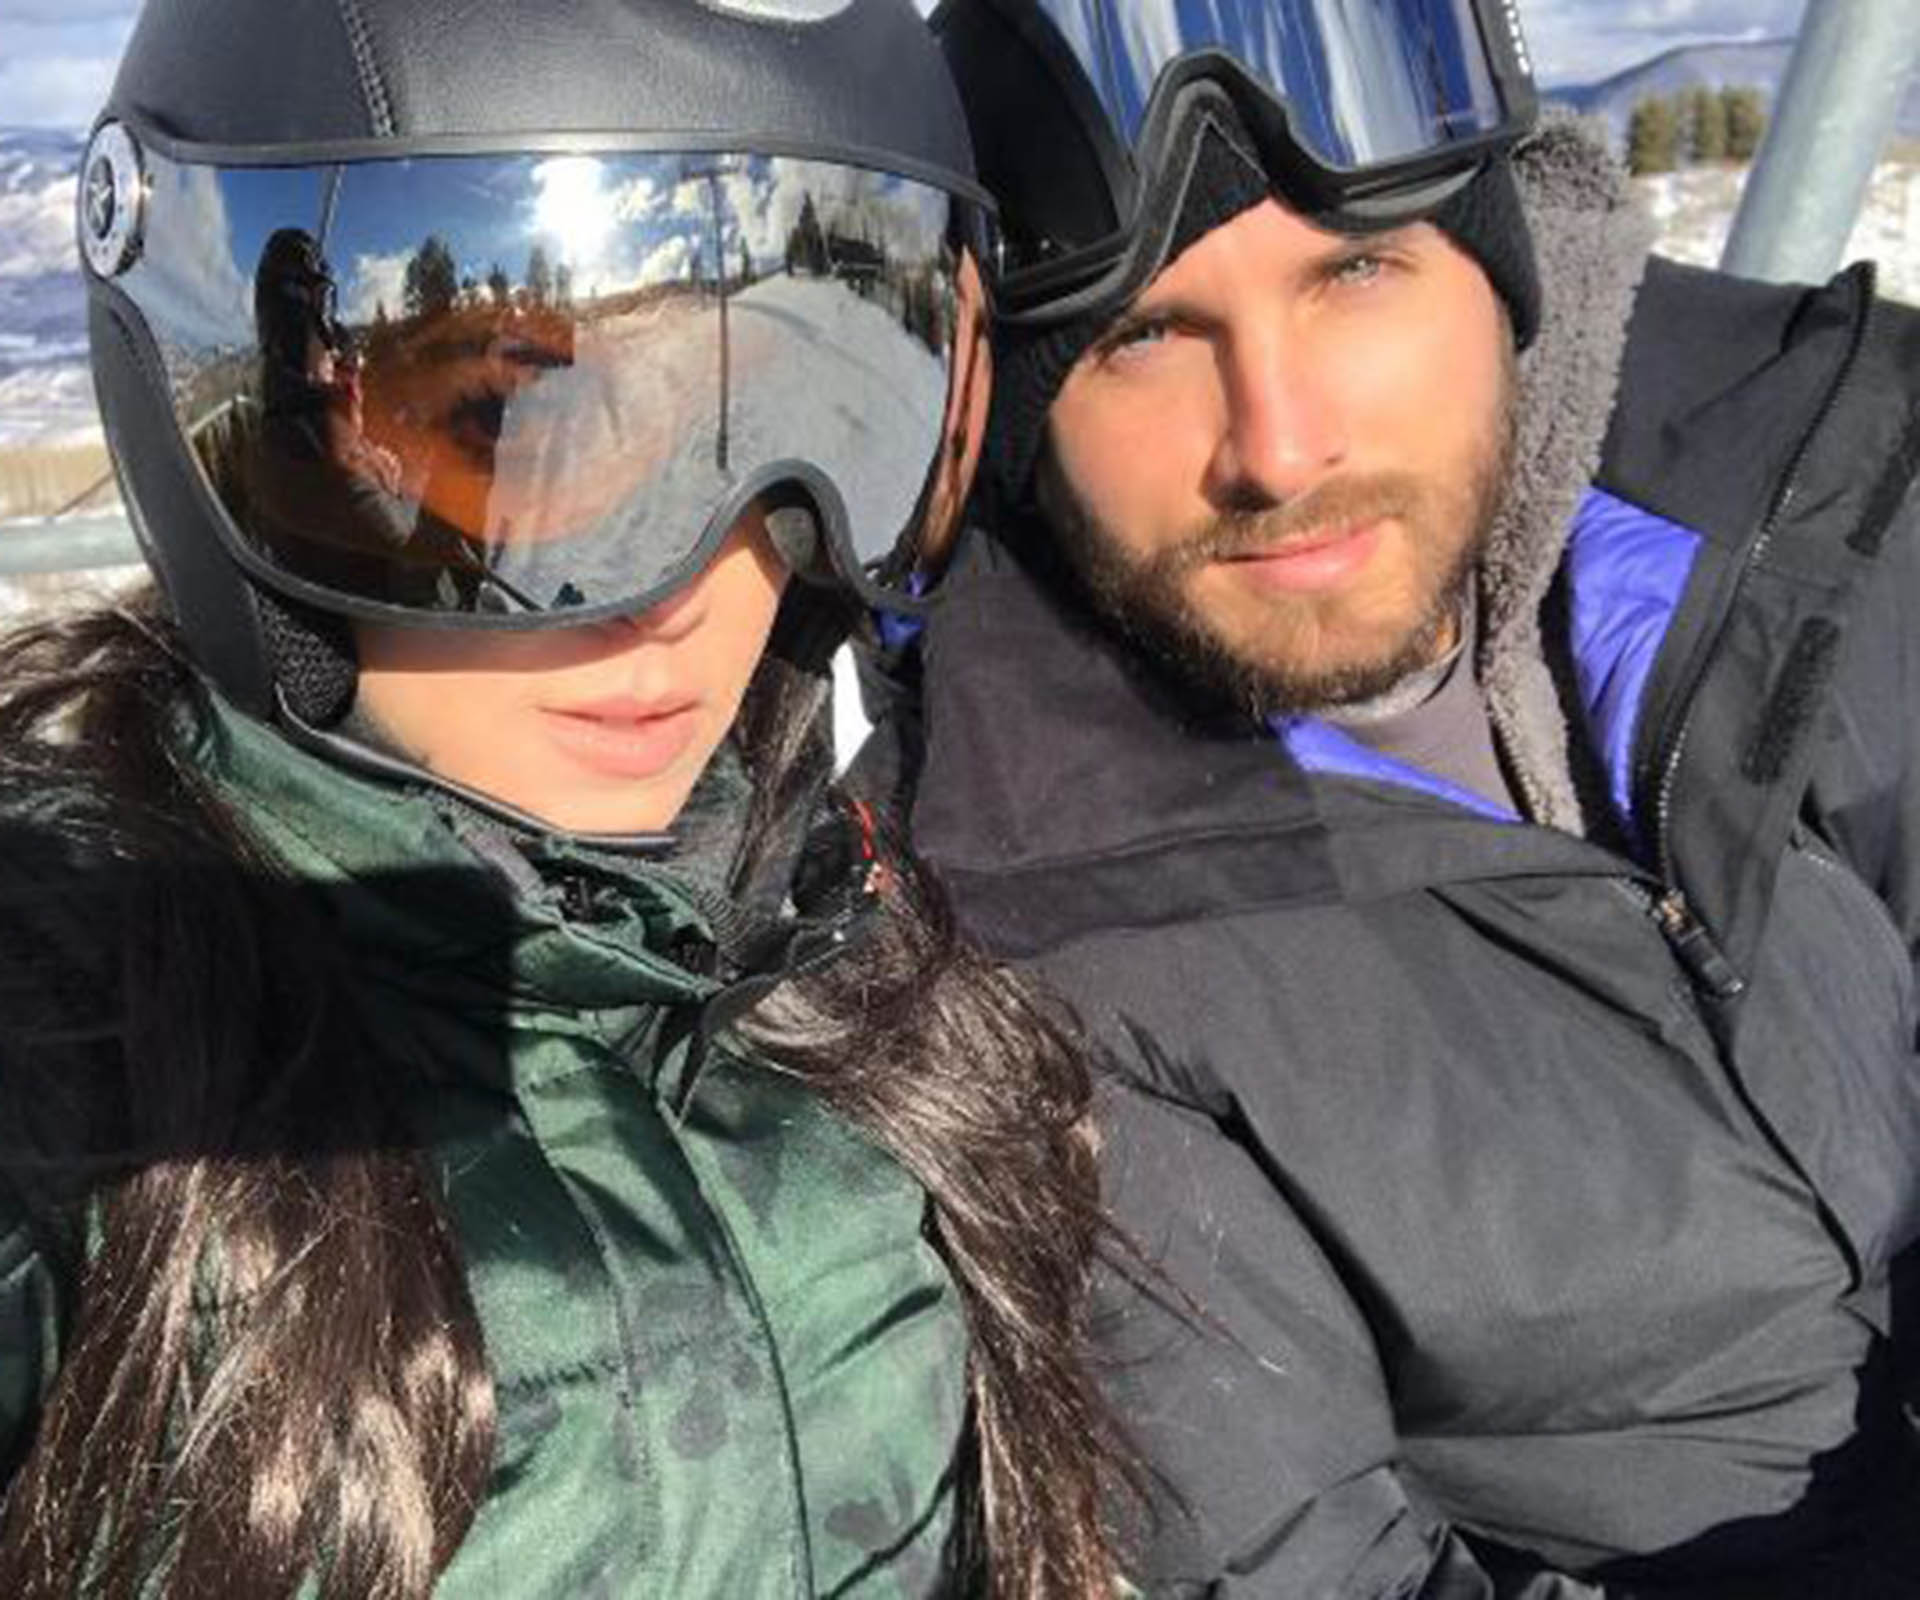 Hold up: Are Kourtney Kardashian and Scott Disick getting married?!